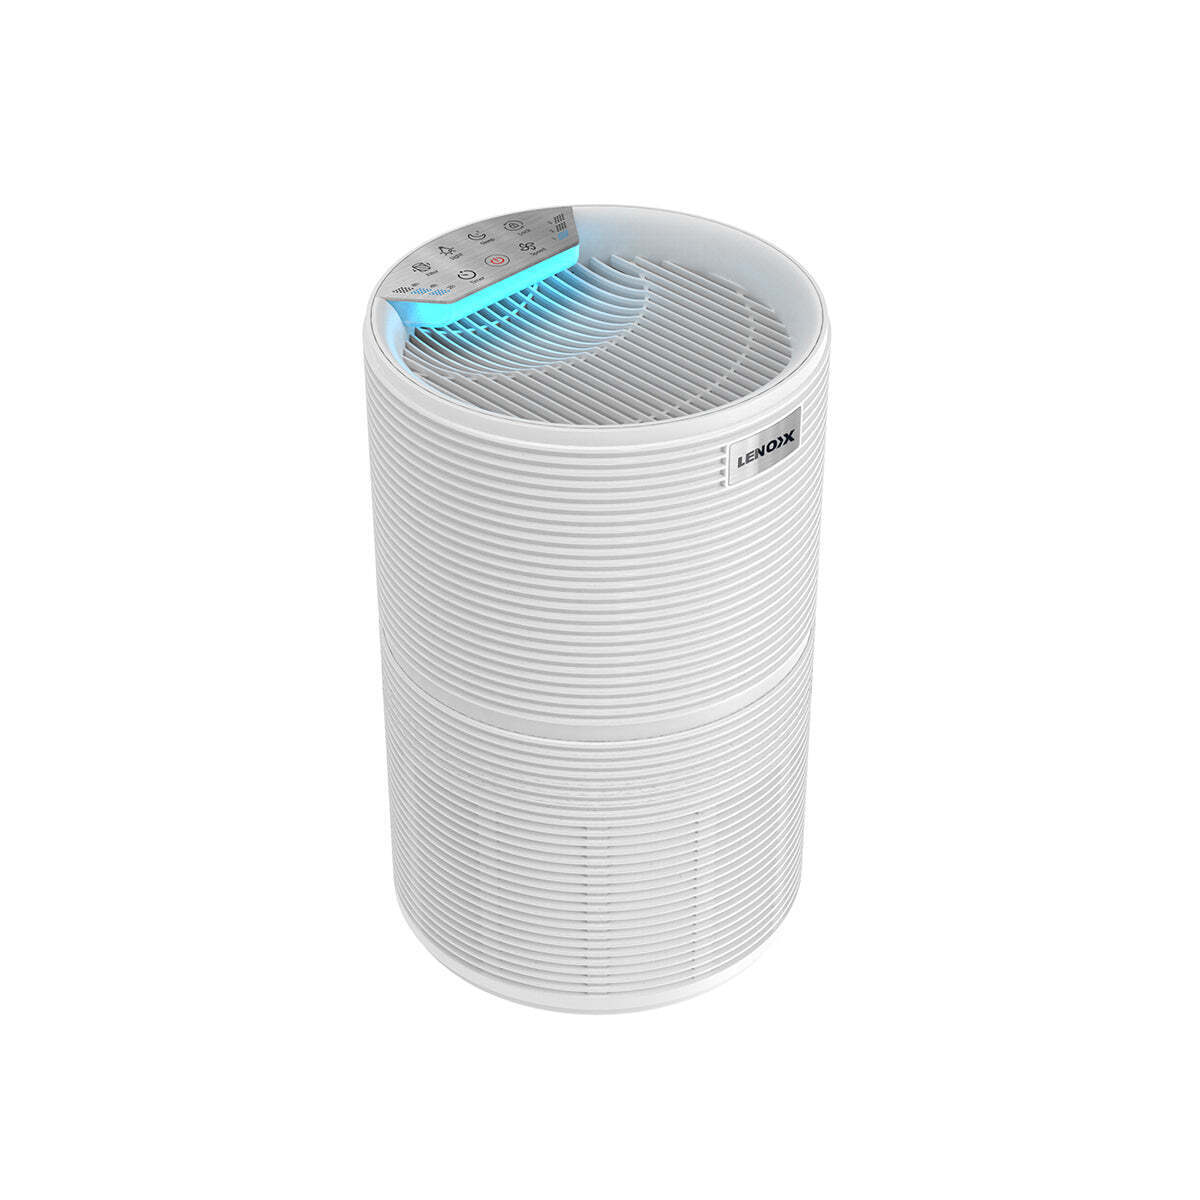 Air Purifier and Cleaner with HEPA Filter Sleep Mode and Timer - White